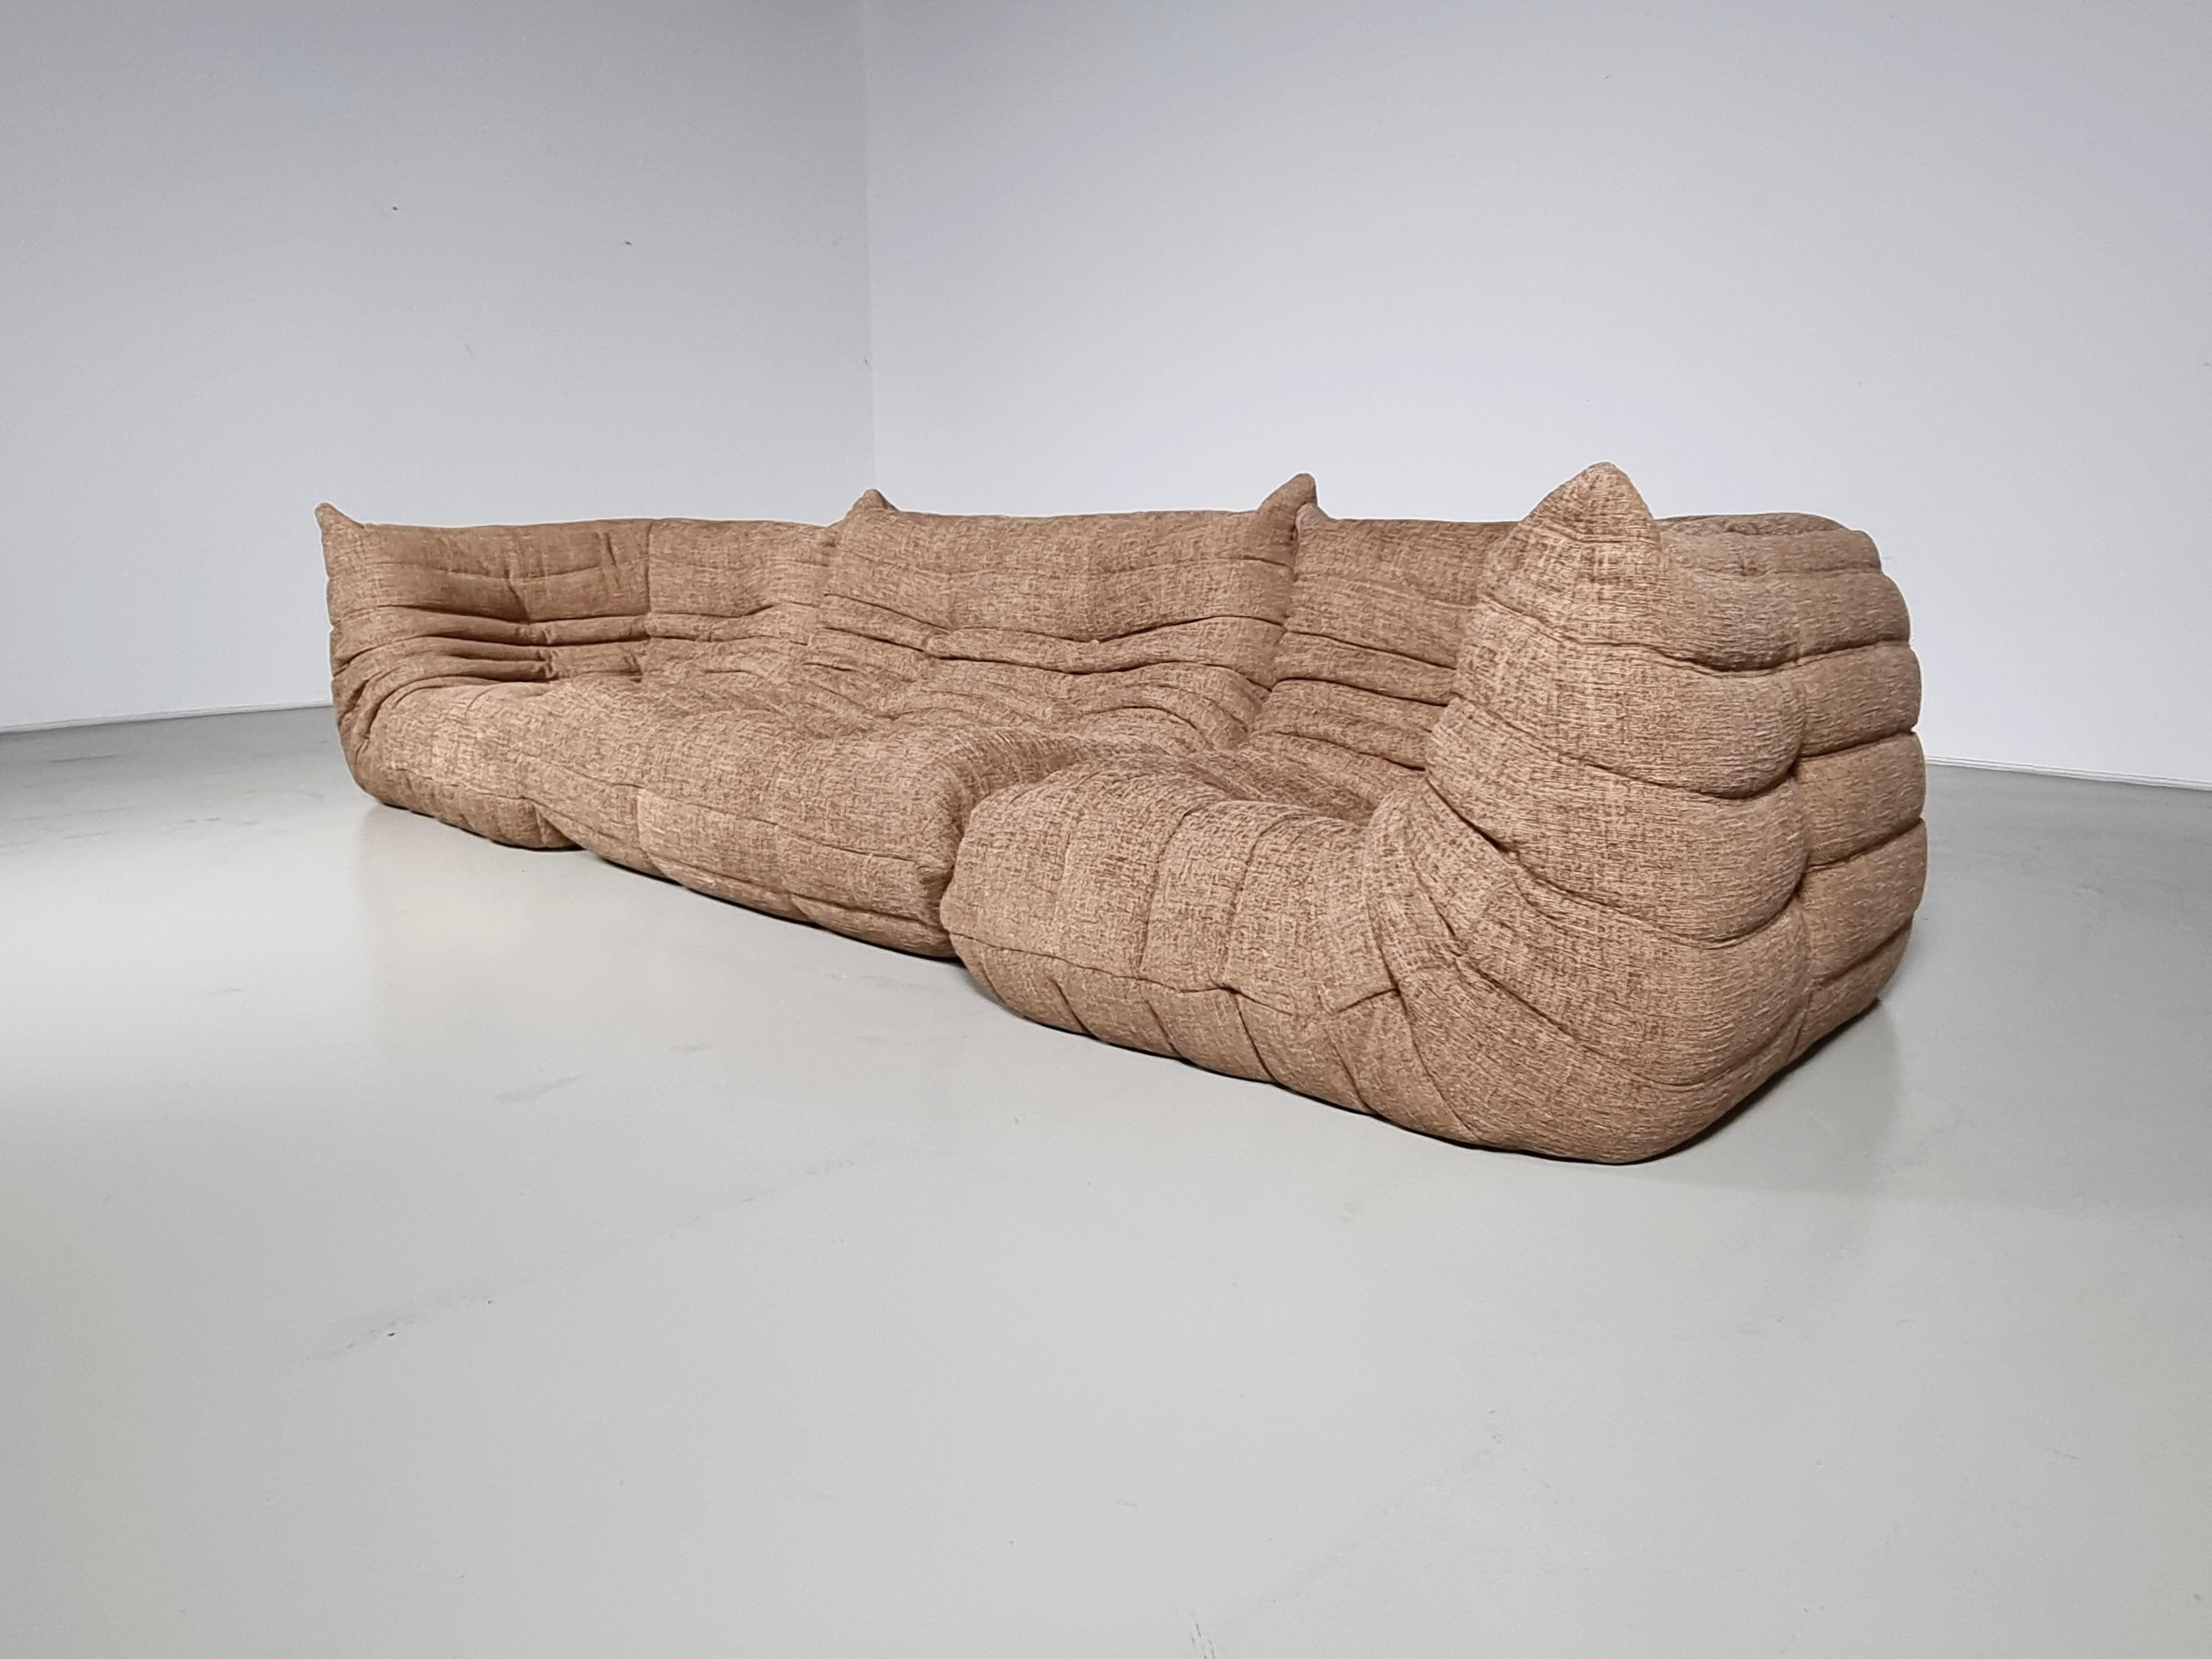 Togo sofa designed by Michel Ducaroy in the 1970s for Ligne Roset.
It shows a nice warm natural color tone and its famous wrinkled cozy design.
Lined underneath with original fabric. It needs reupholstery 
This is an original piece, not a cheap